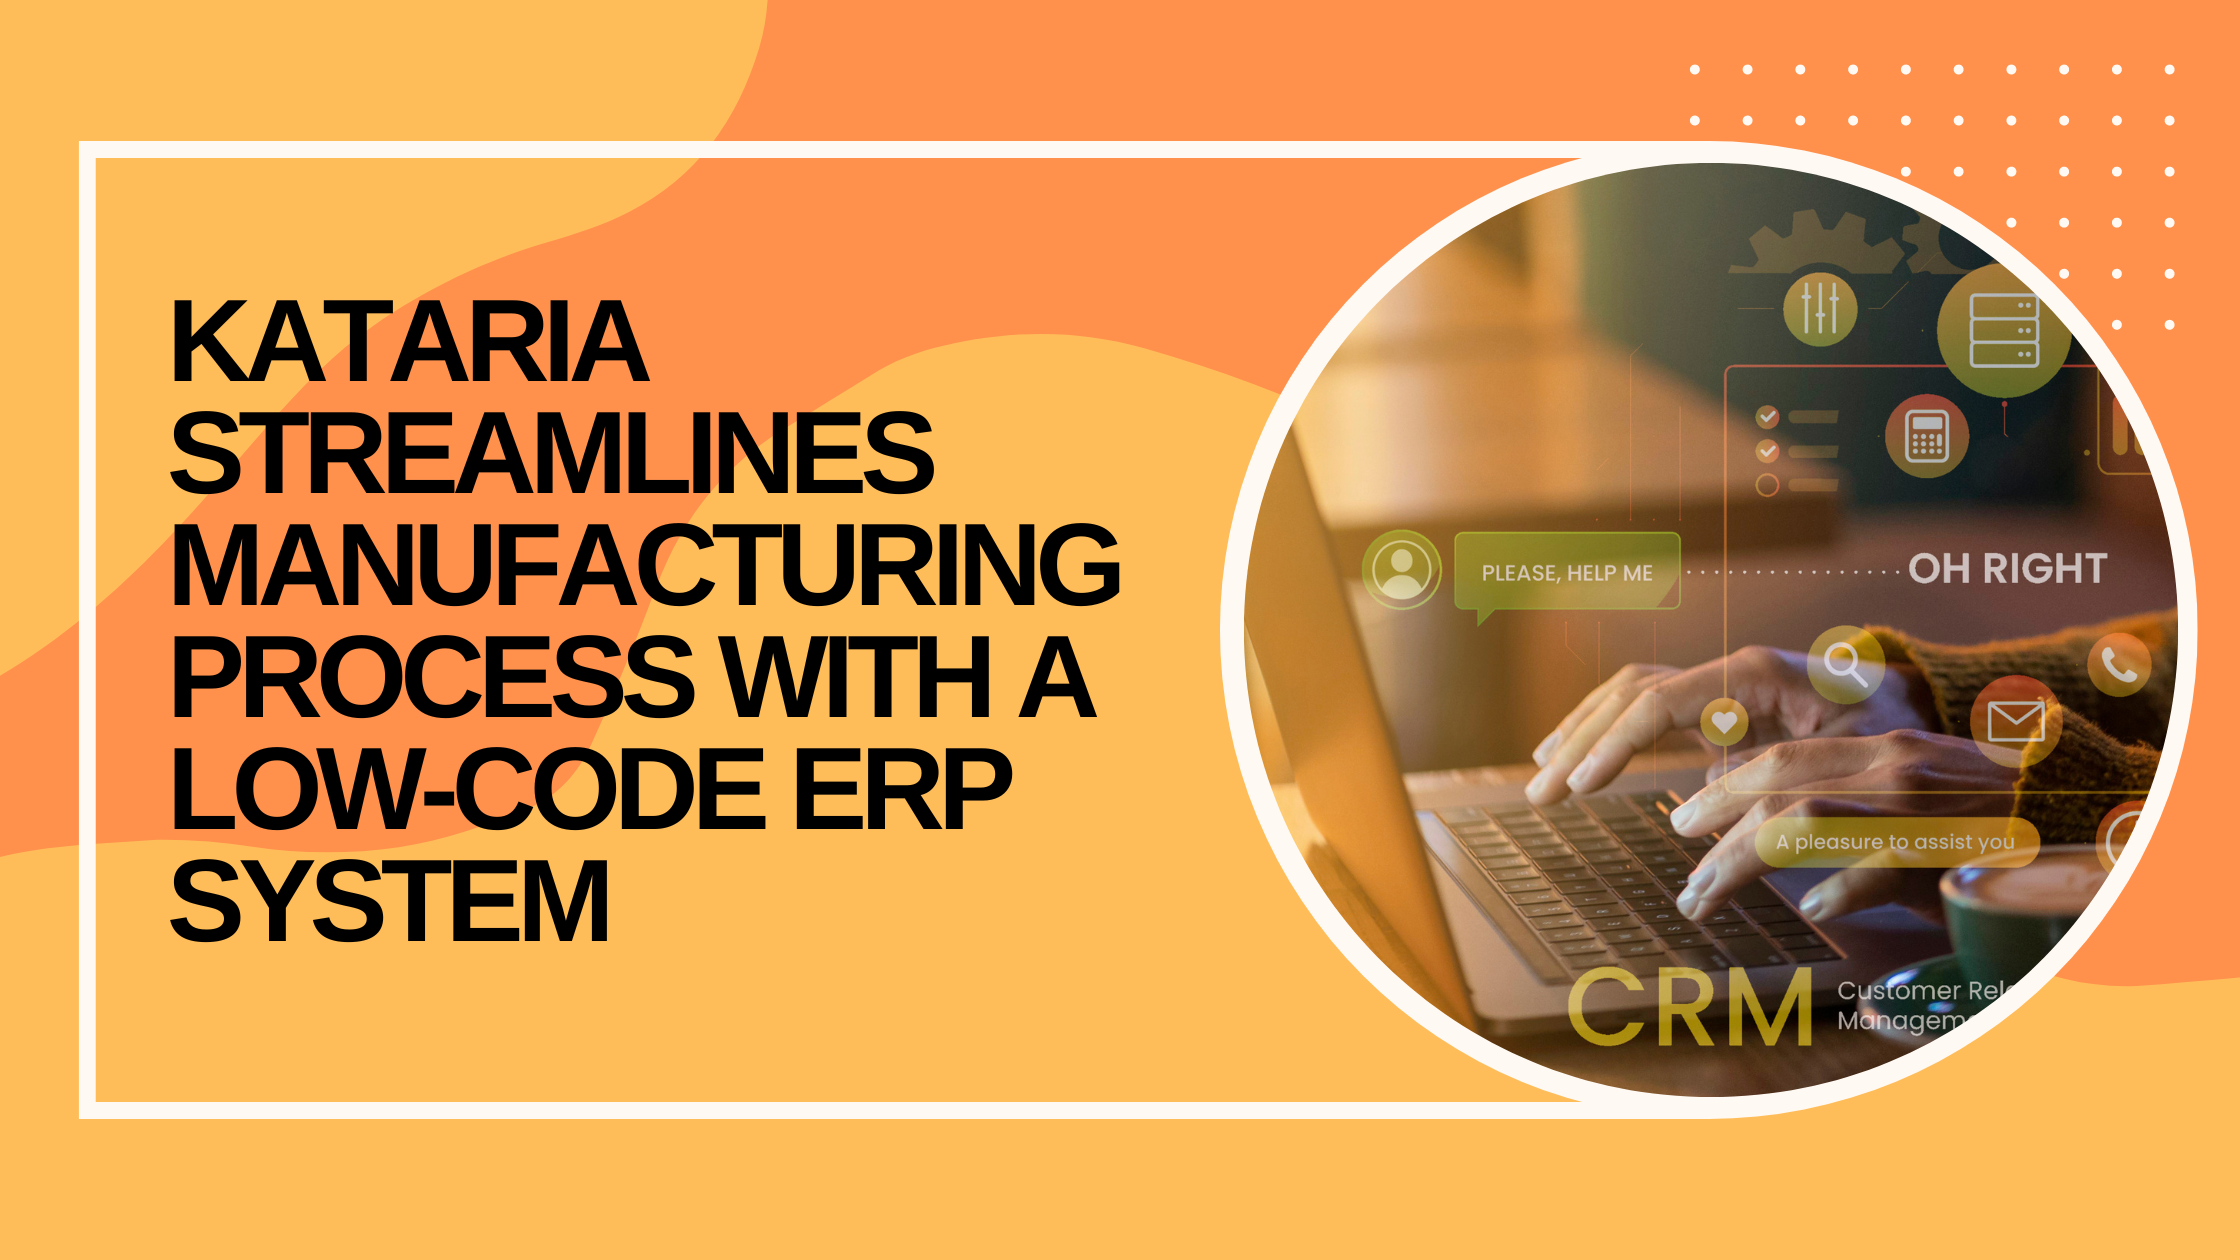 Kataria Streamlines Manufacturing Process with a Low-Code ERP System 